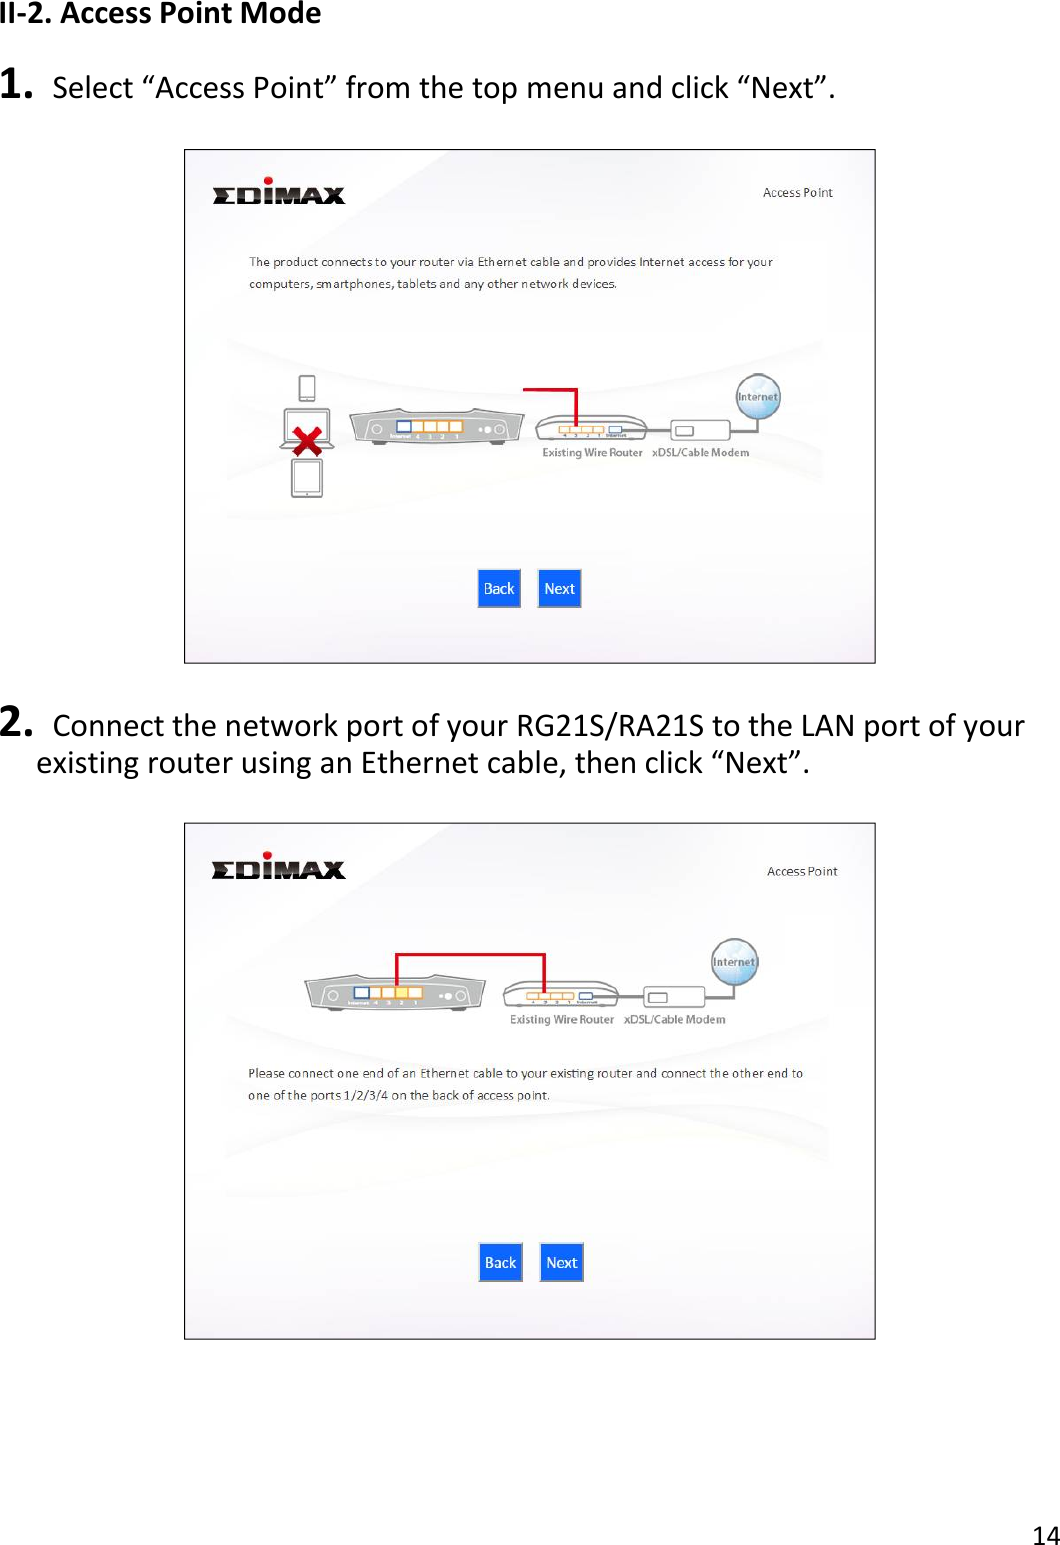 14  II-2. Access Point Mode  1.   Select “Access Point” from the top menu and click “Next”.    2.   Connect the network port of your RG21S/RA21S to the LAN port of your existing router using an Ethernet cable, then click “Next”.     